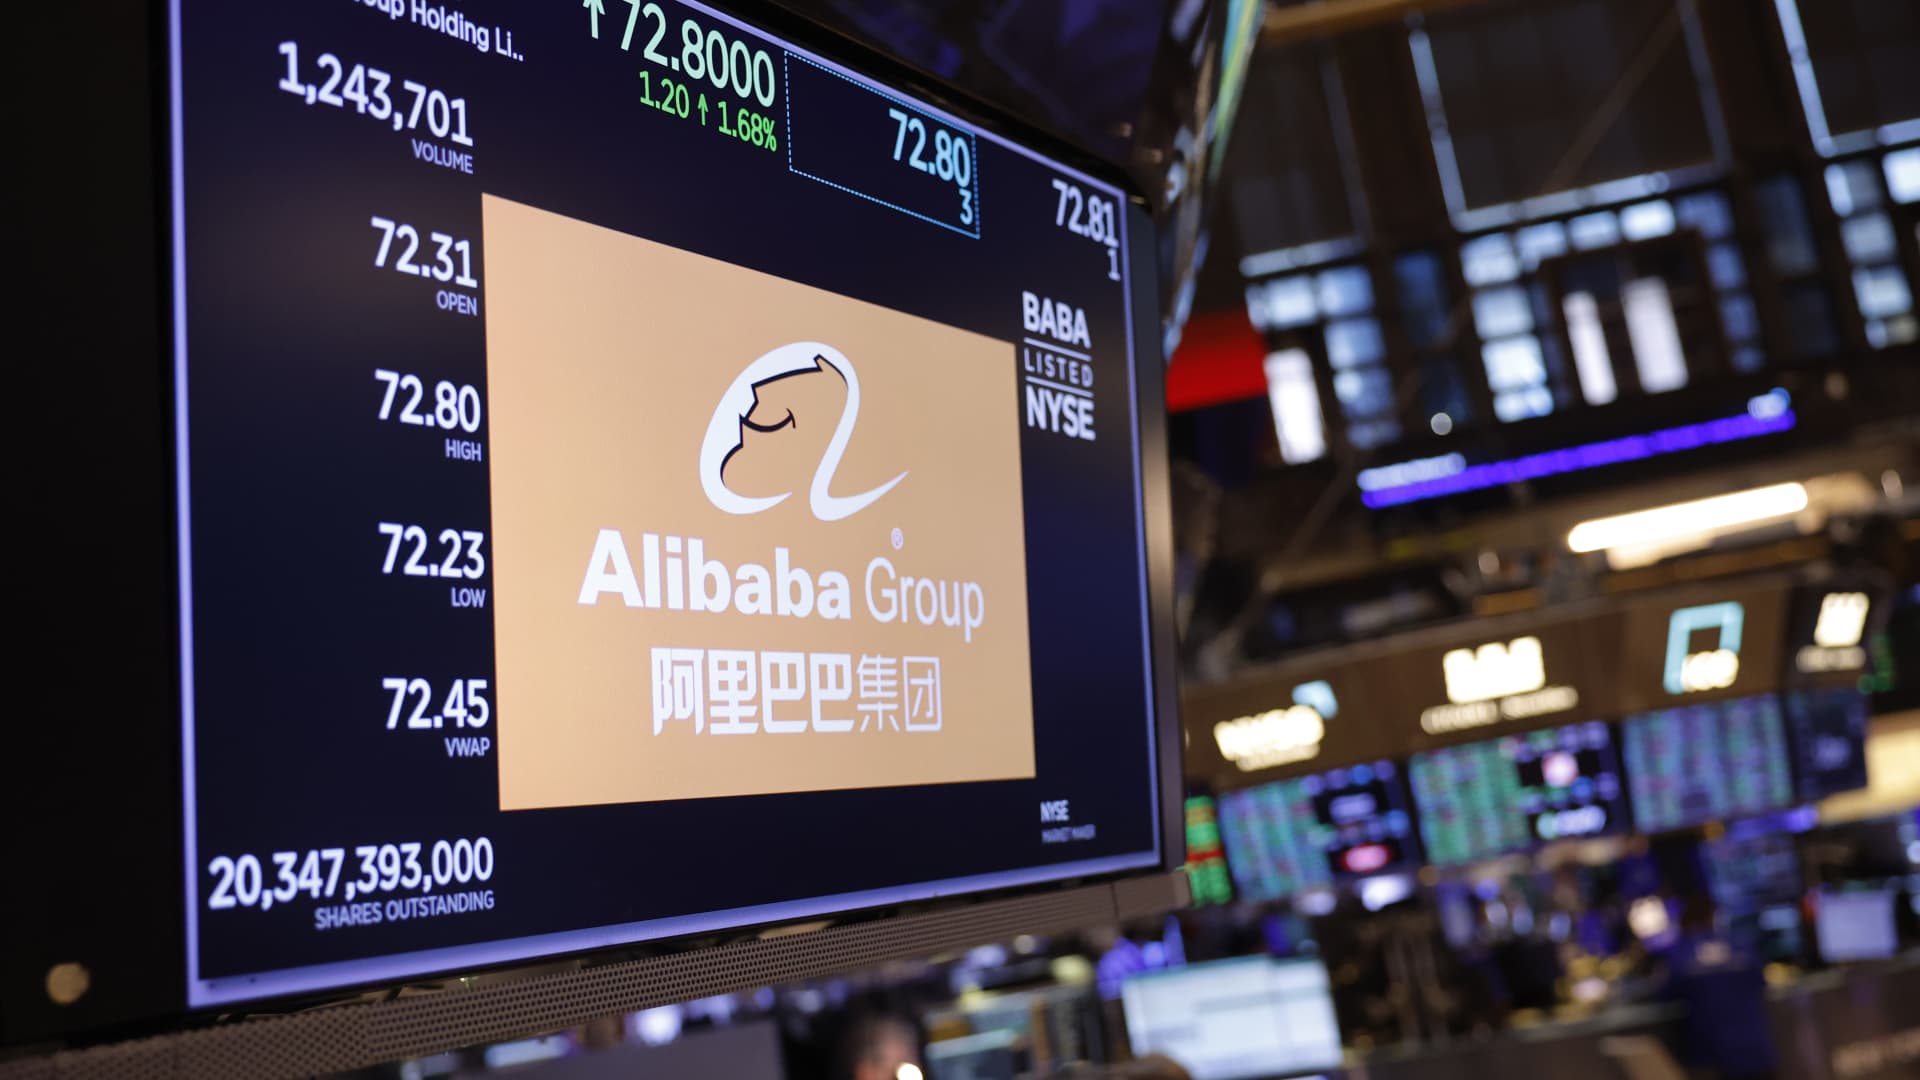 Alibaba (BABA) scraps Cainiao IPO, offers full ownership